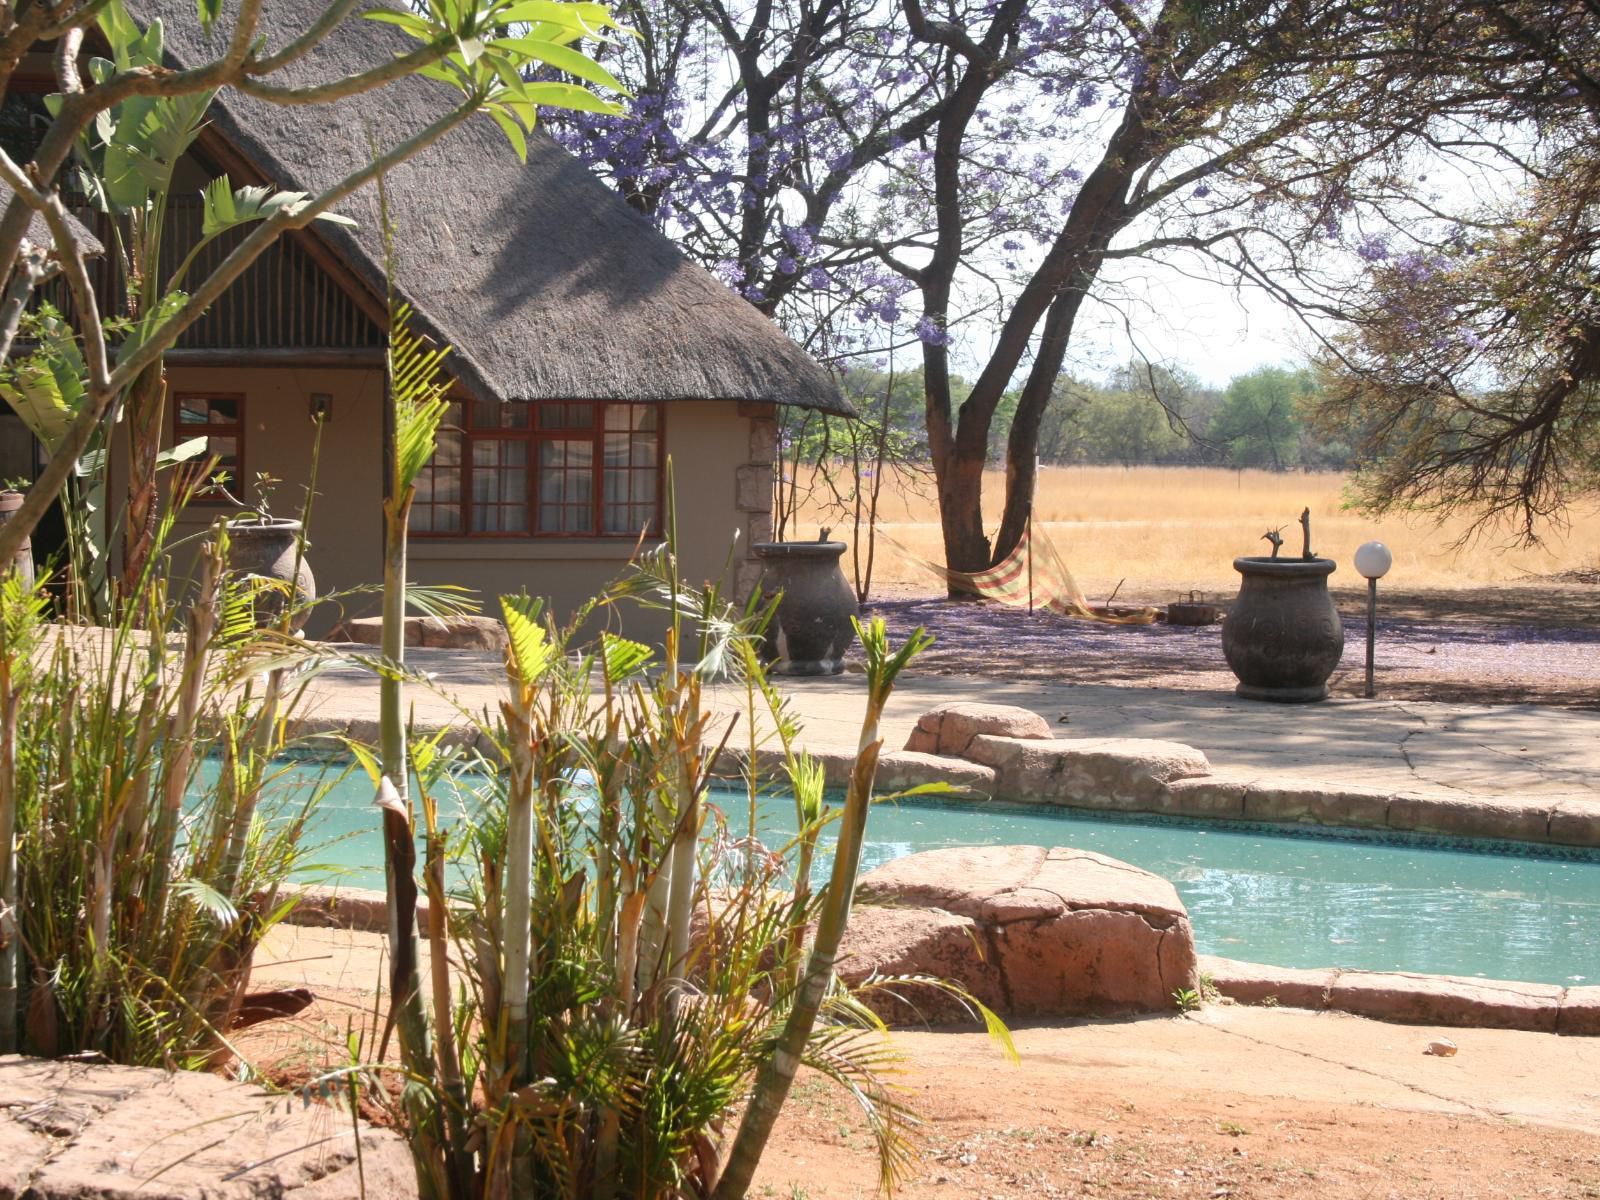 Kranskop Lodge Modimolle Nylstroom Limpopo Province South Africa Swimming Pool